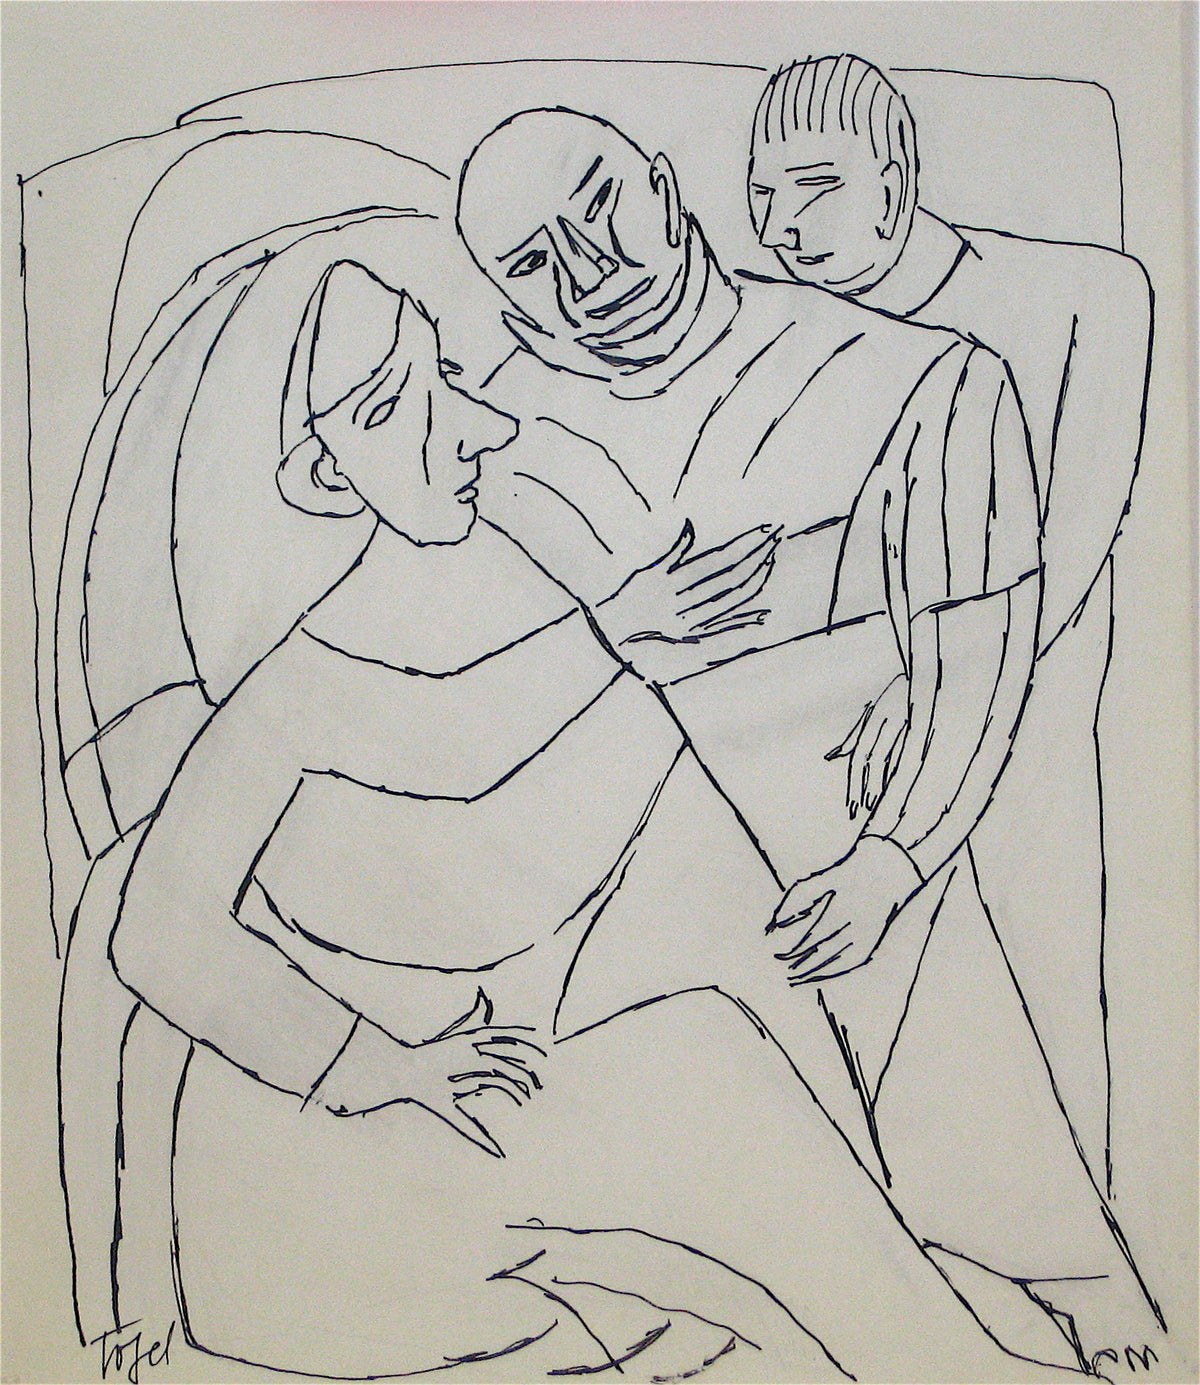 Abstracted Figures with Monk and Nun &lt;br&gt;Early 20th Century Ink on Paper &lt;br&gt;&lt;br&gt;#11197